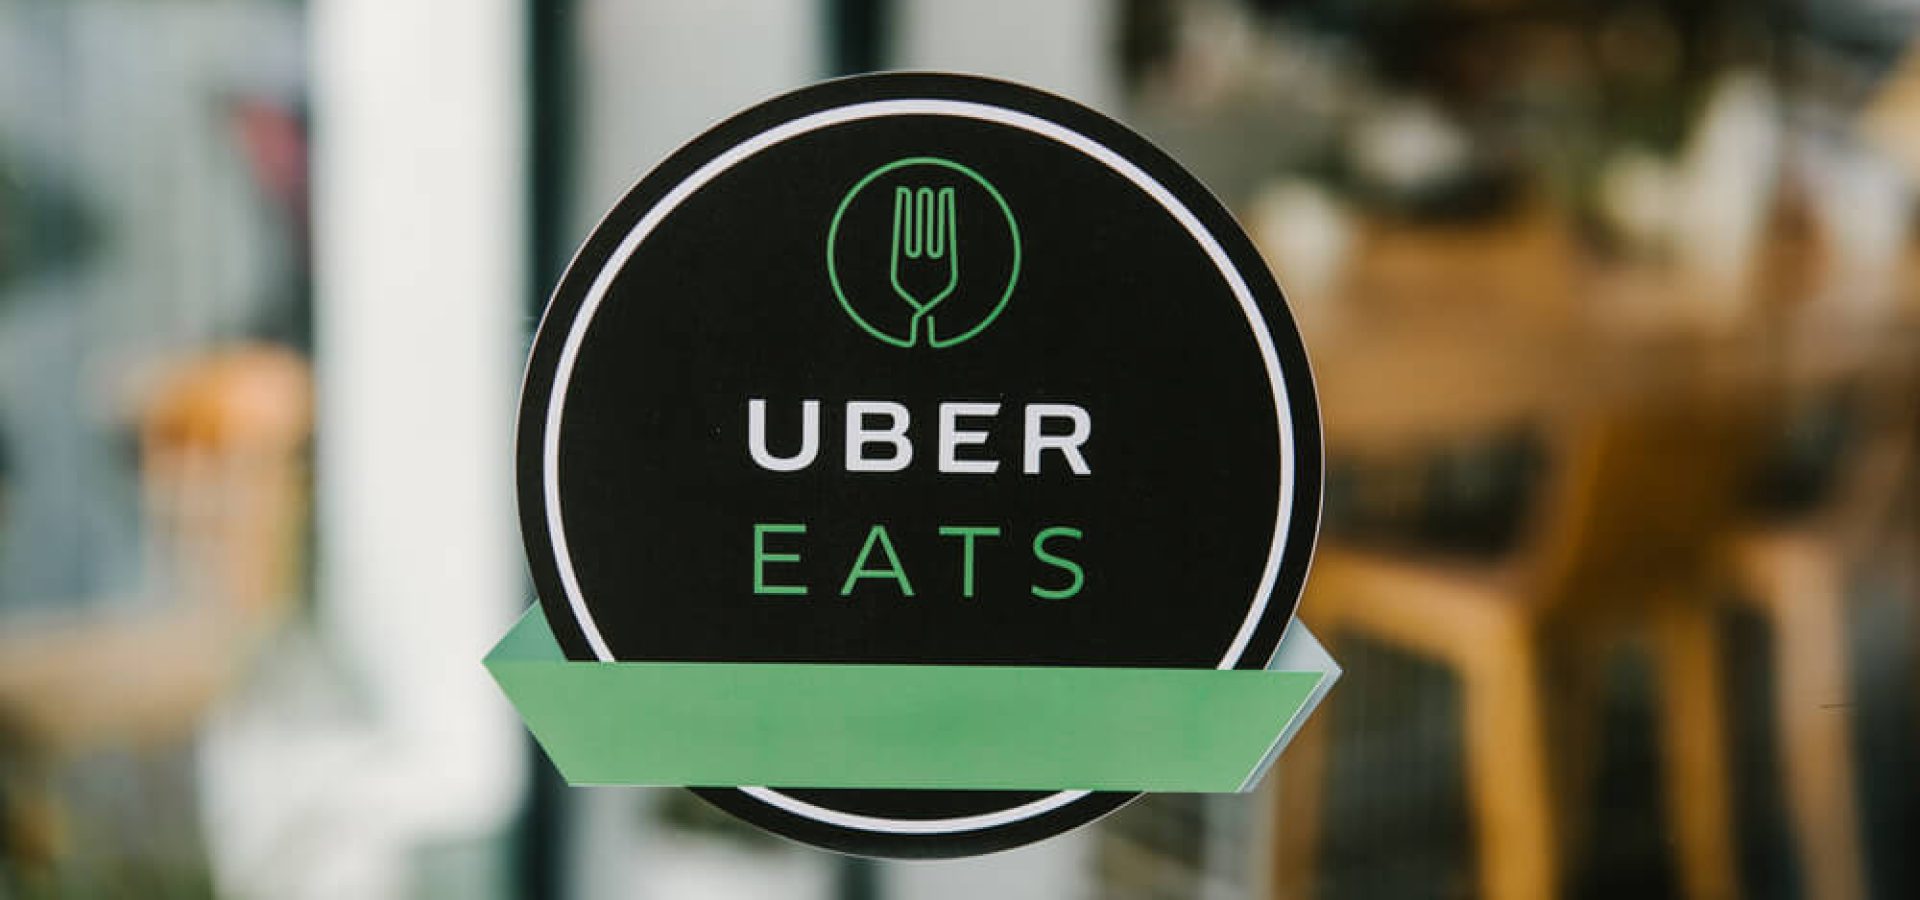 Uber and food delivery business